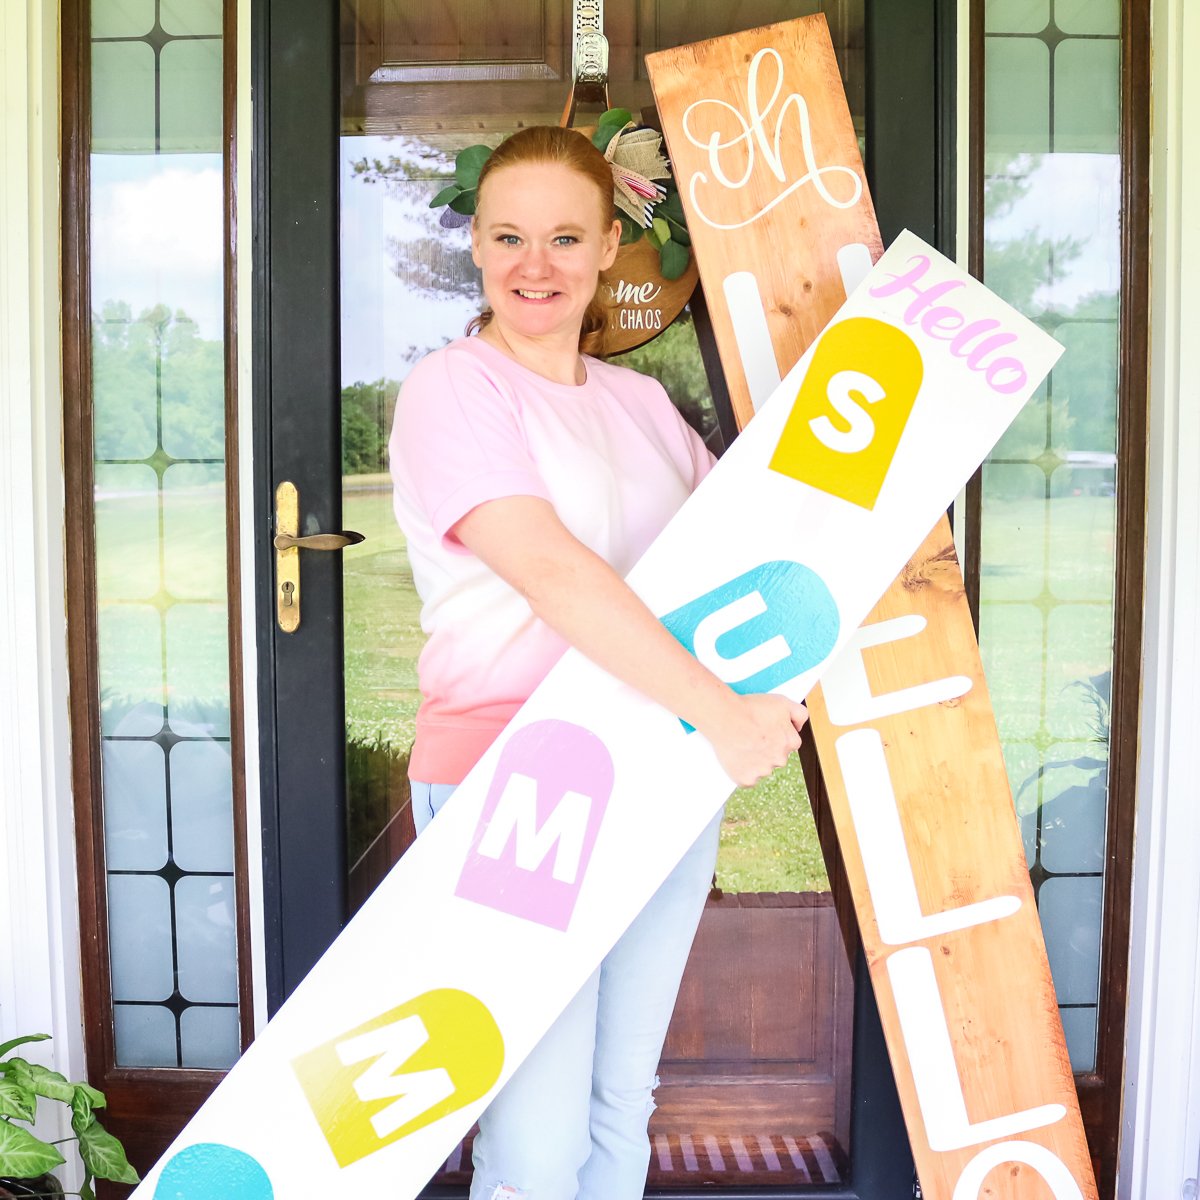 How to Cut Wood with the Cricut Maker - Angie Holden The Country Chic  Cottage